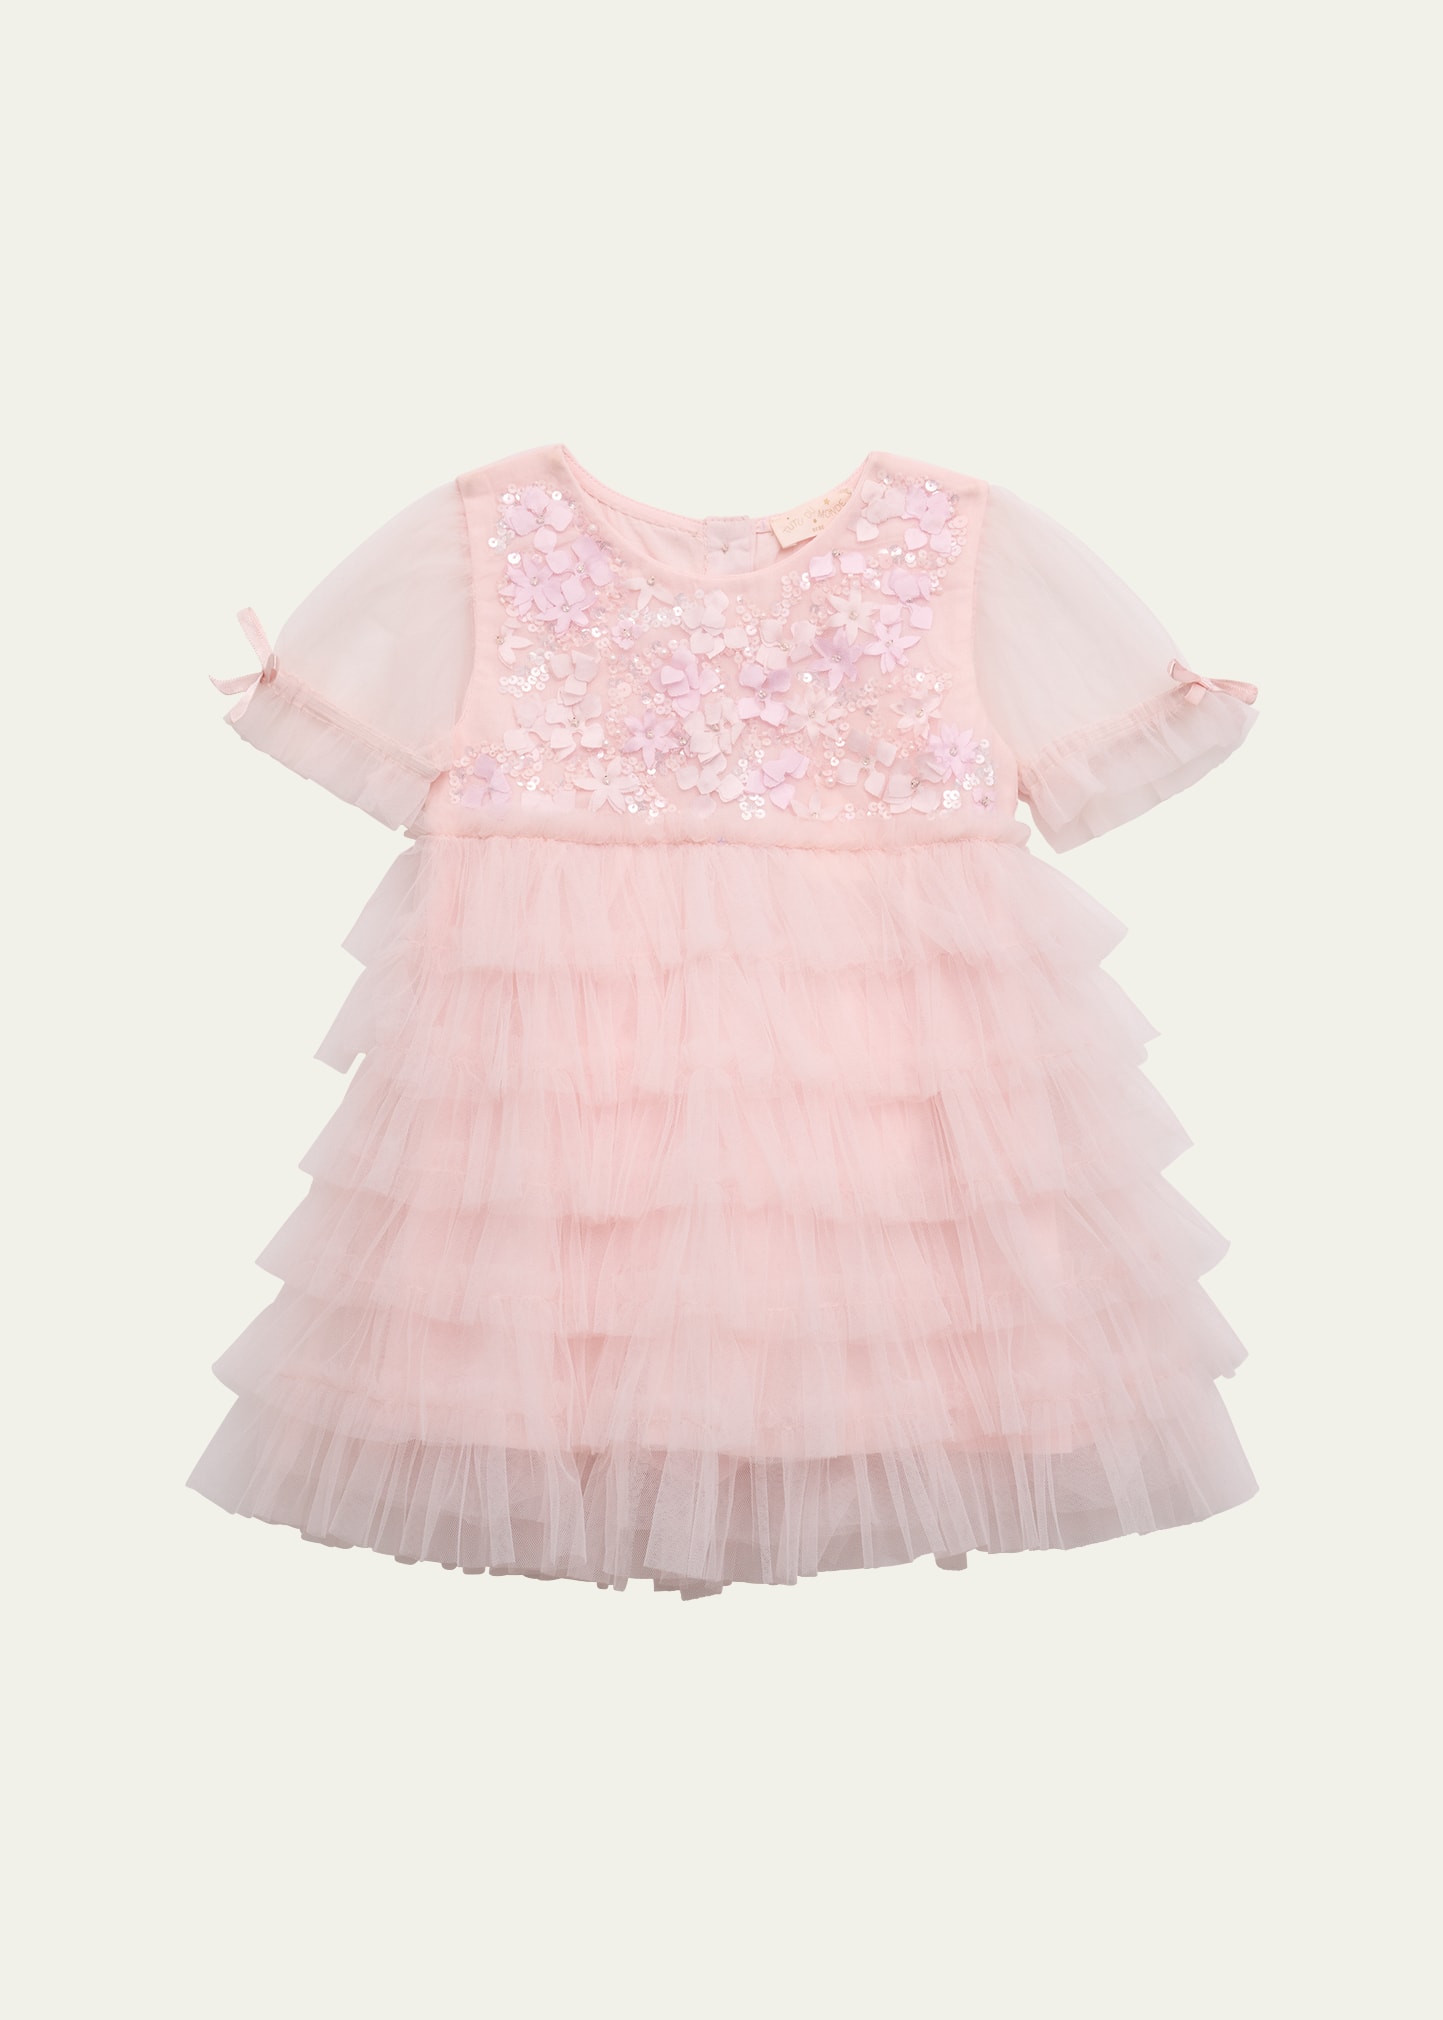 Girl's Bebe Florescence Sequin Tiered Tulle Dress, Size 3M-24M